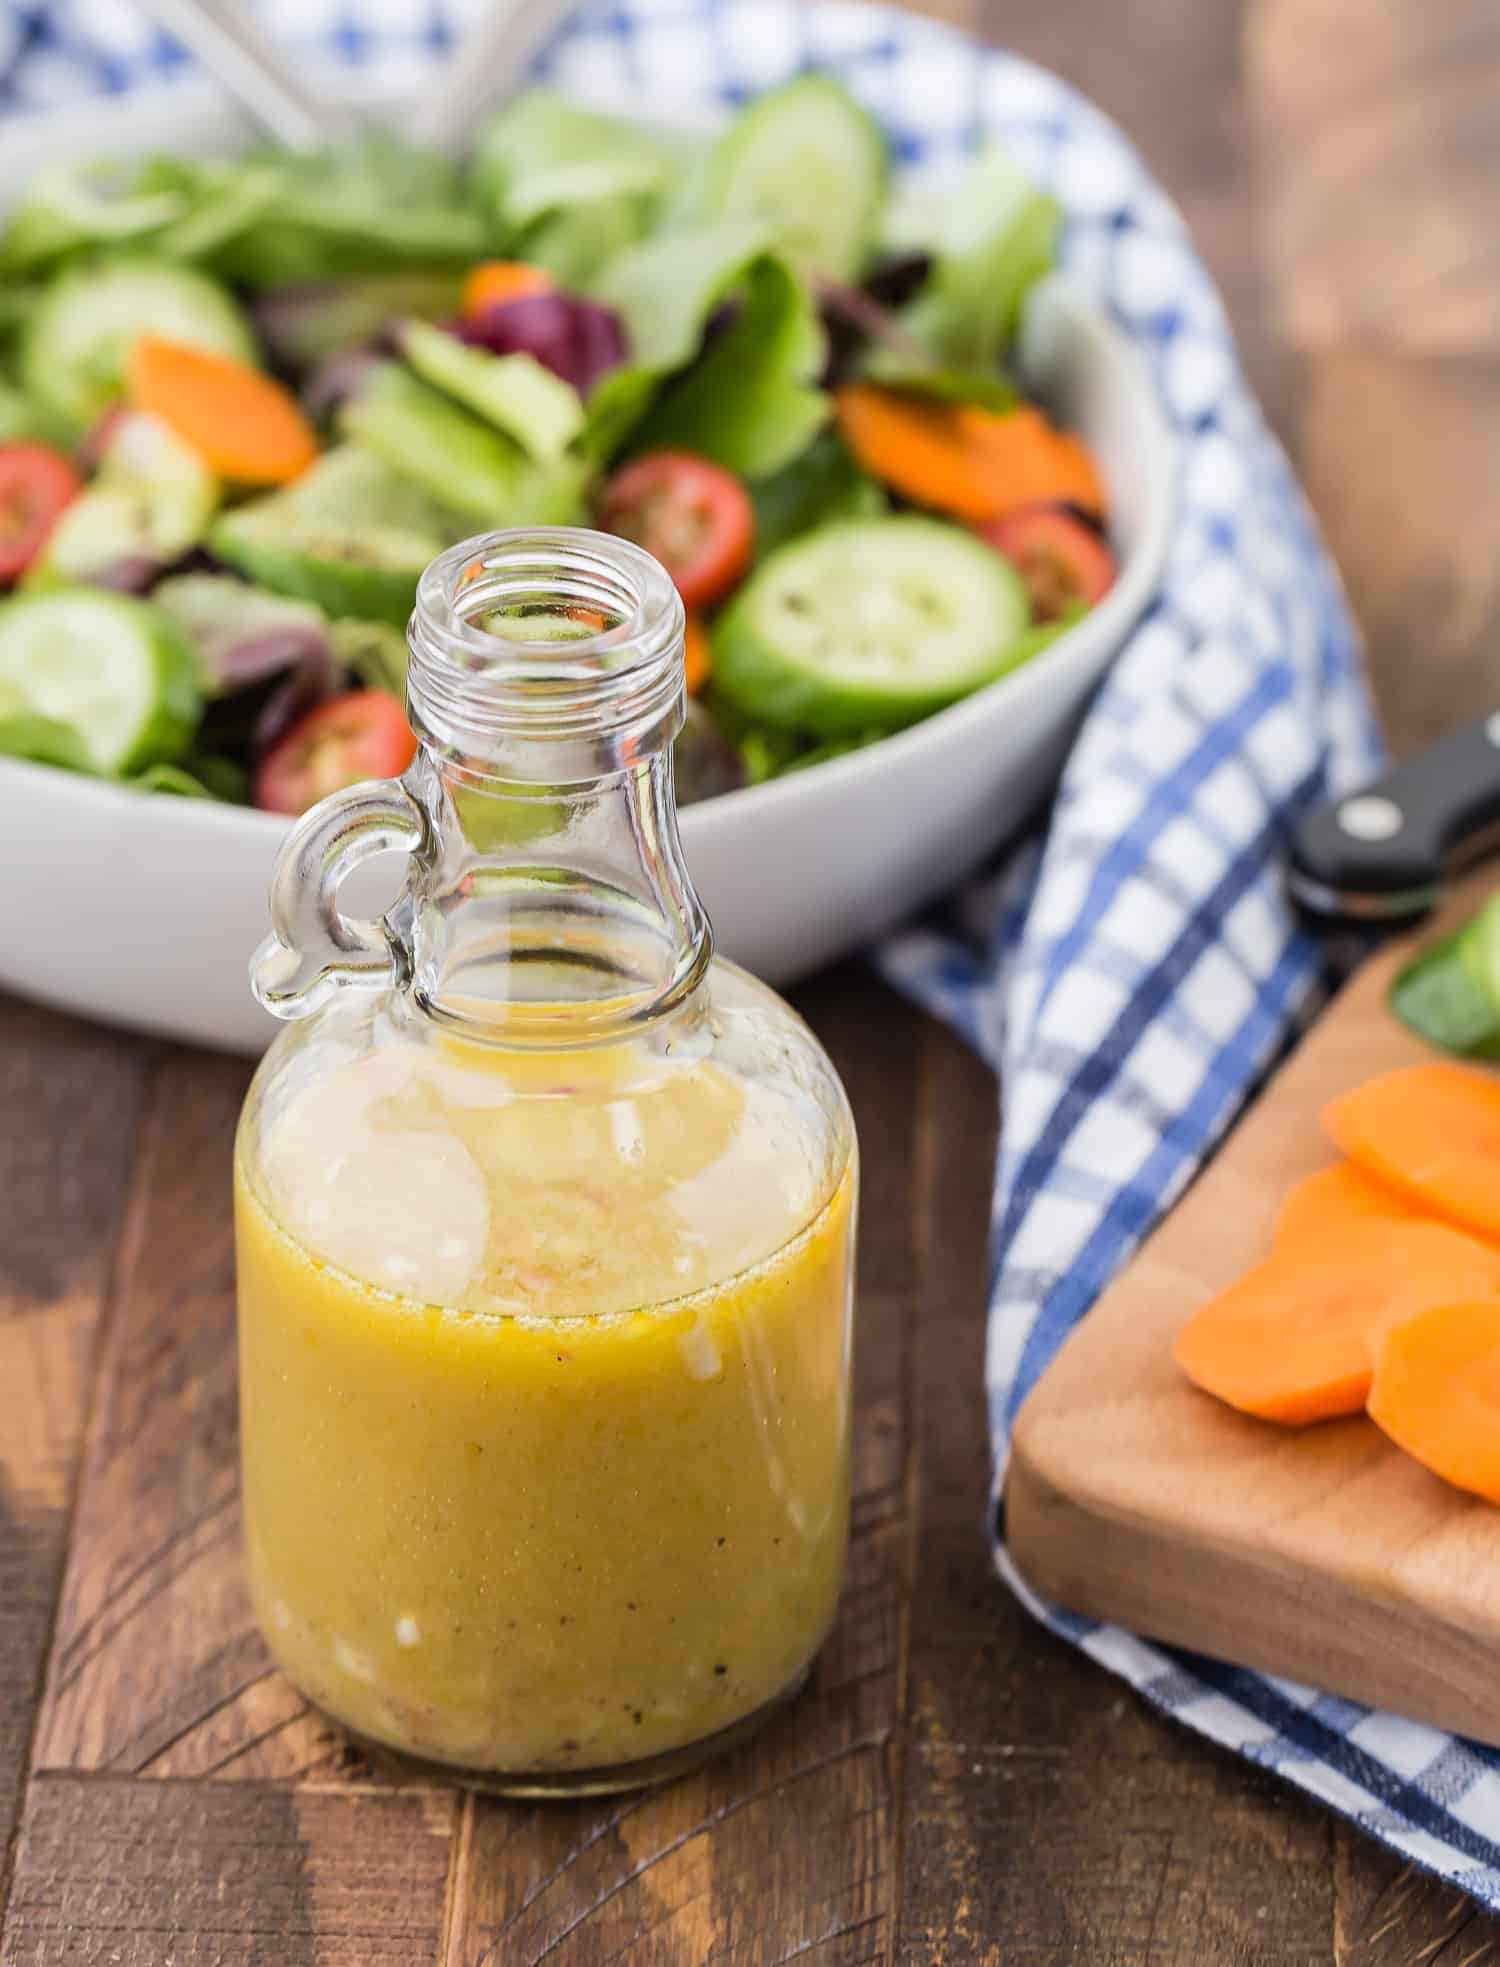 White wine vinaigrette with a salad in the background.